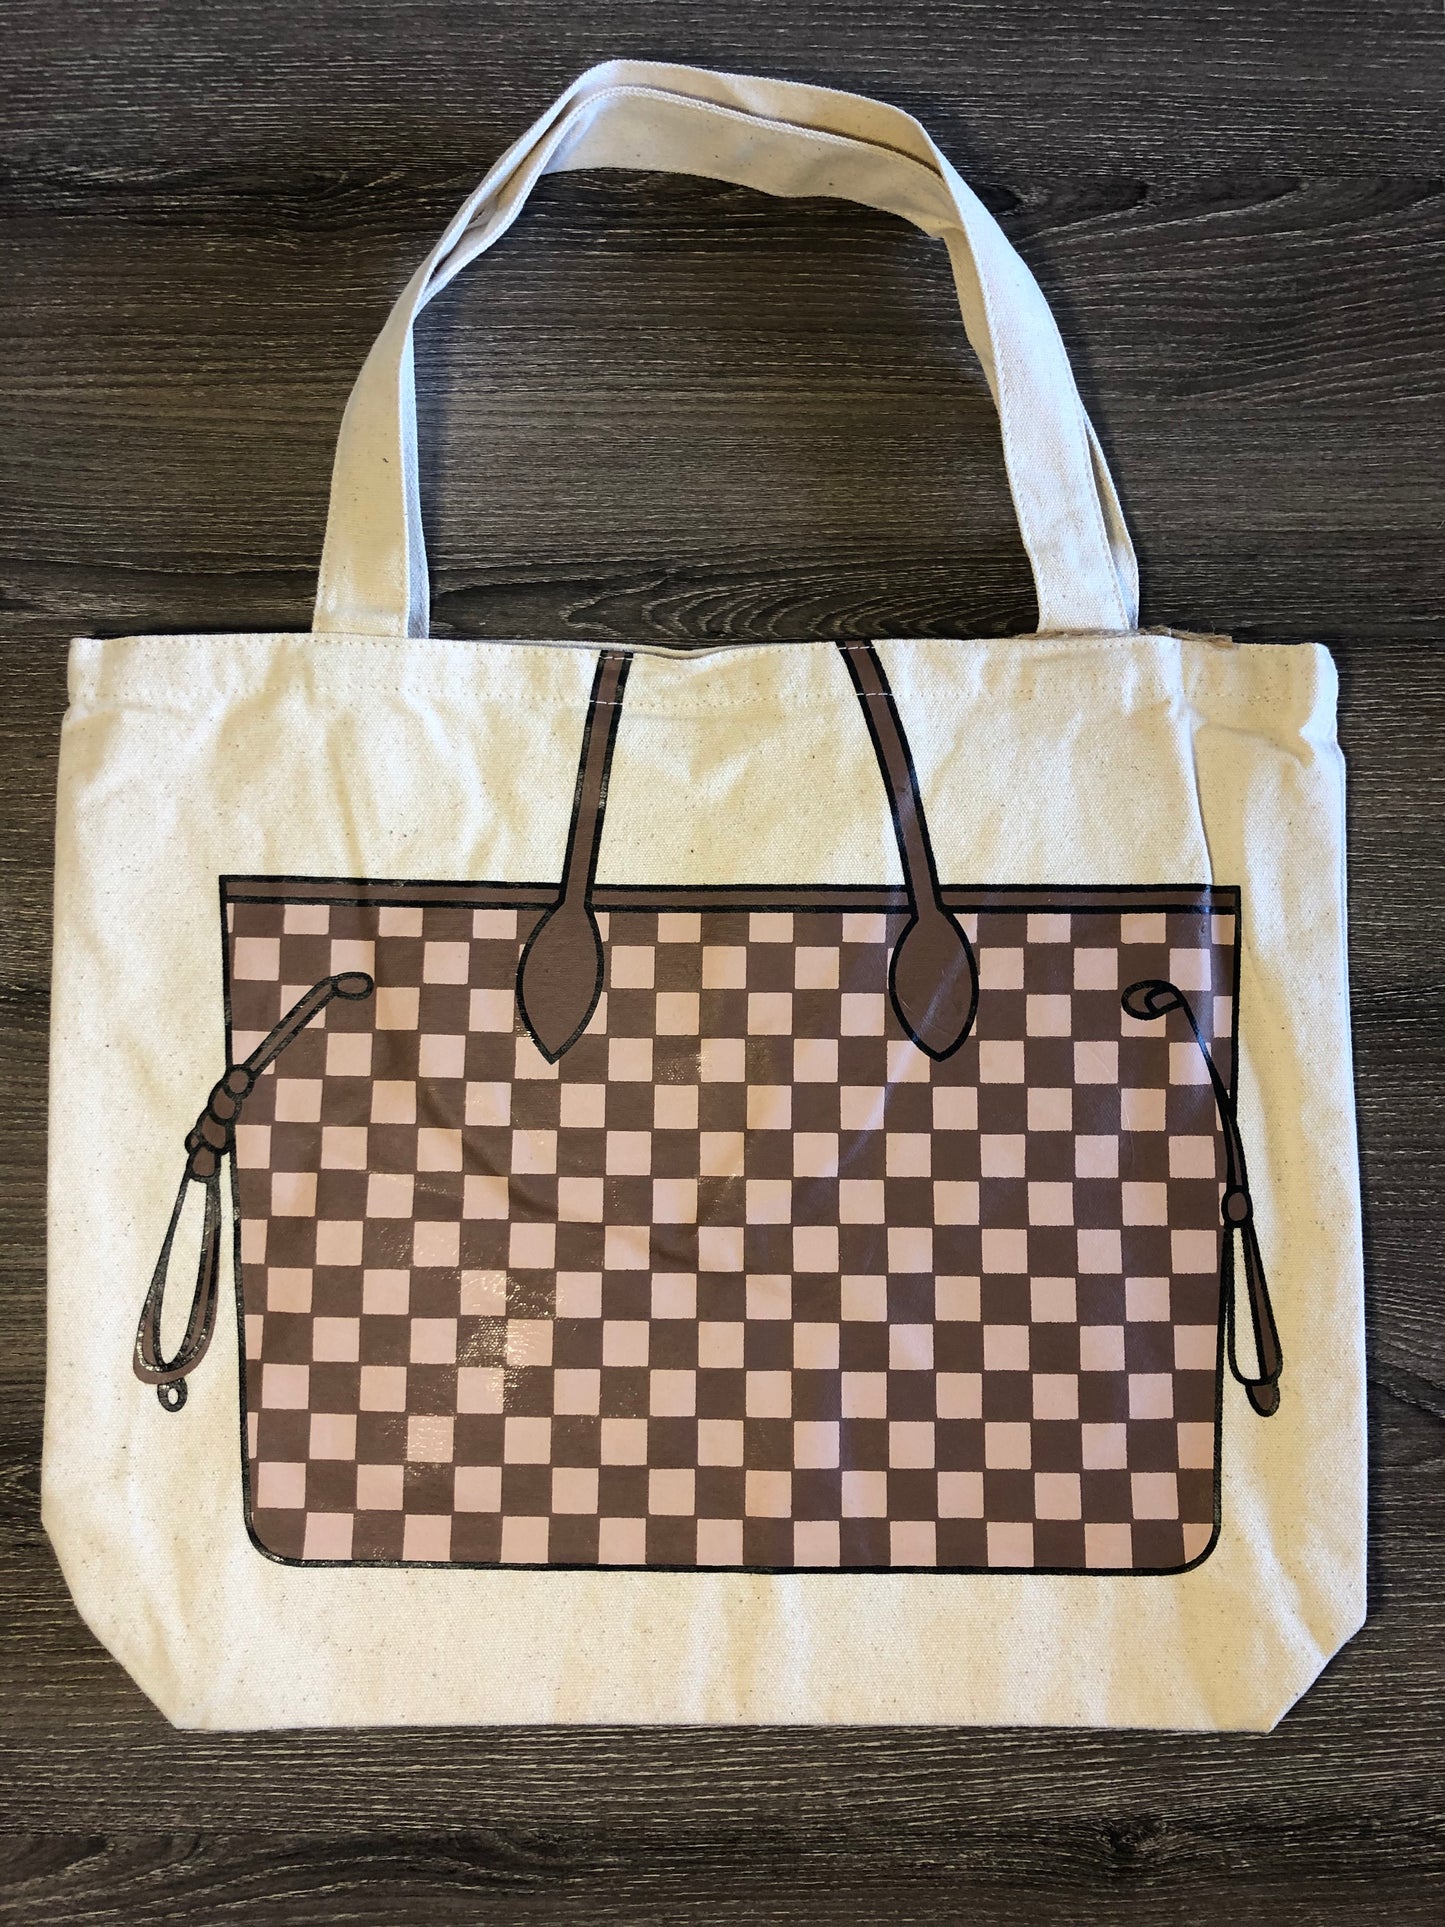 My Other Bag  LV Tote